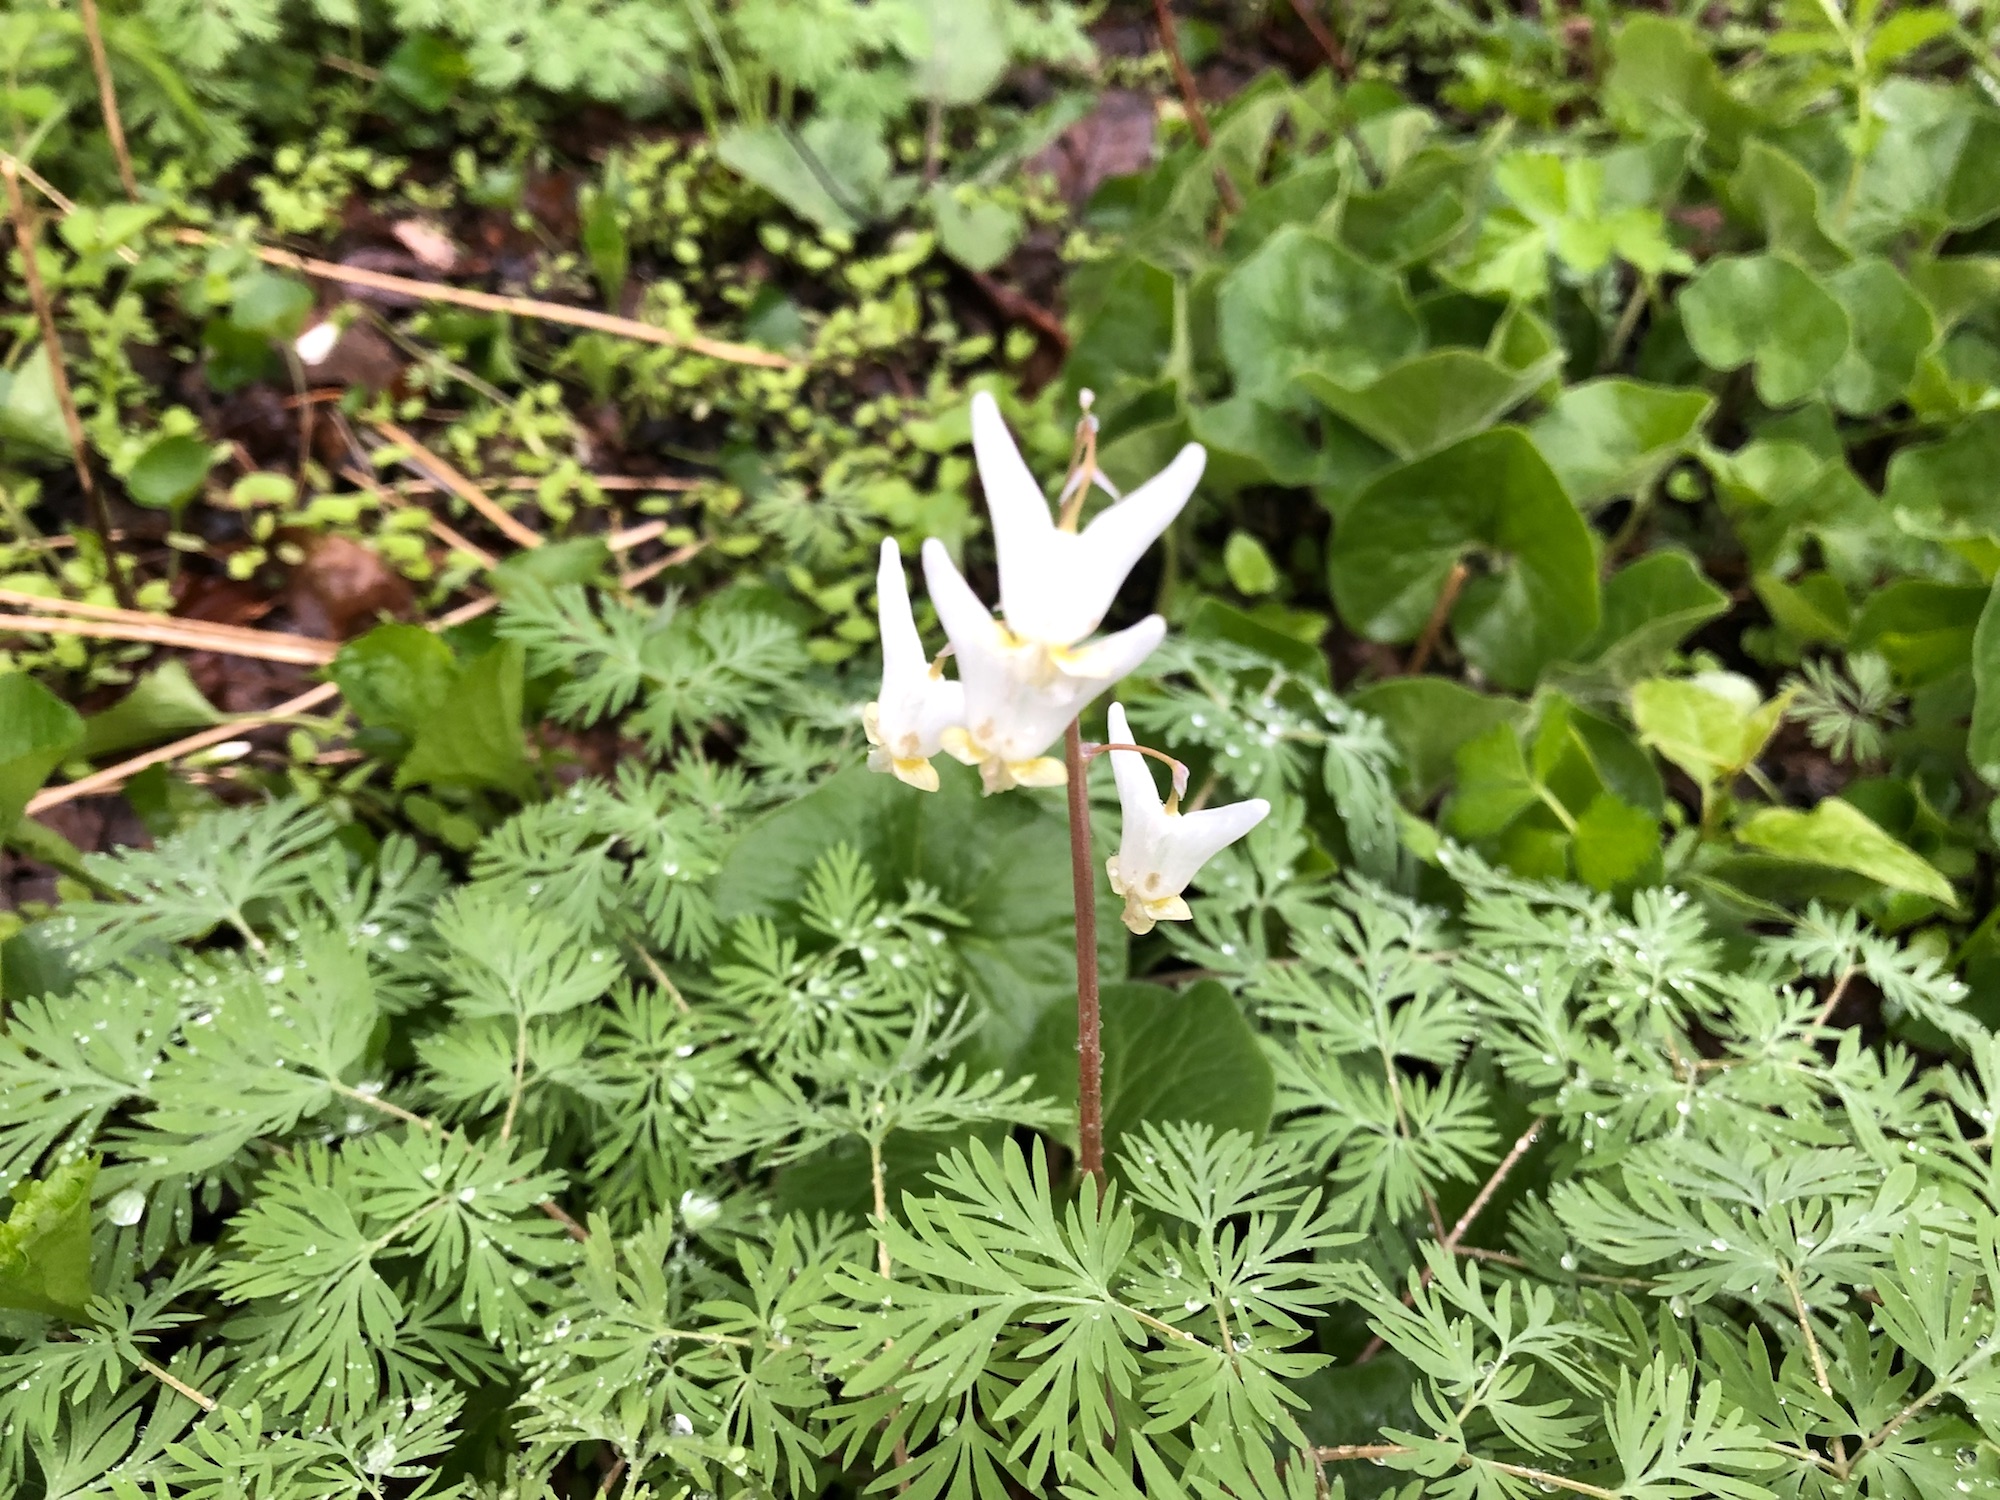 Dutchman's Breeches by Duck Pond on April 29, 2019.